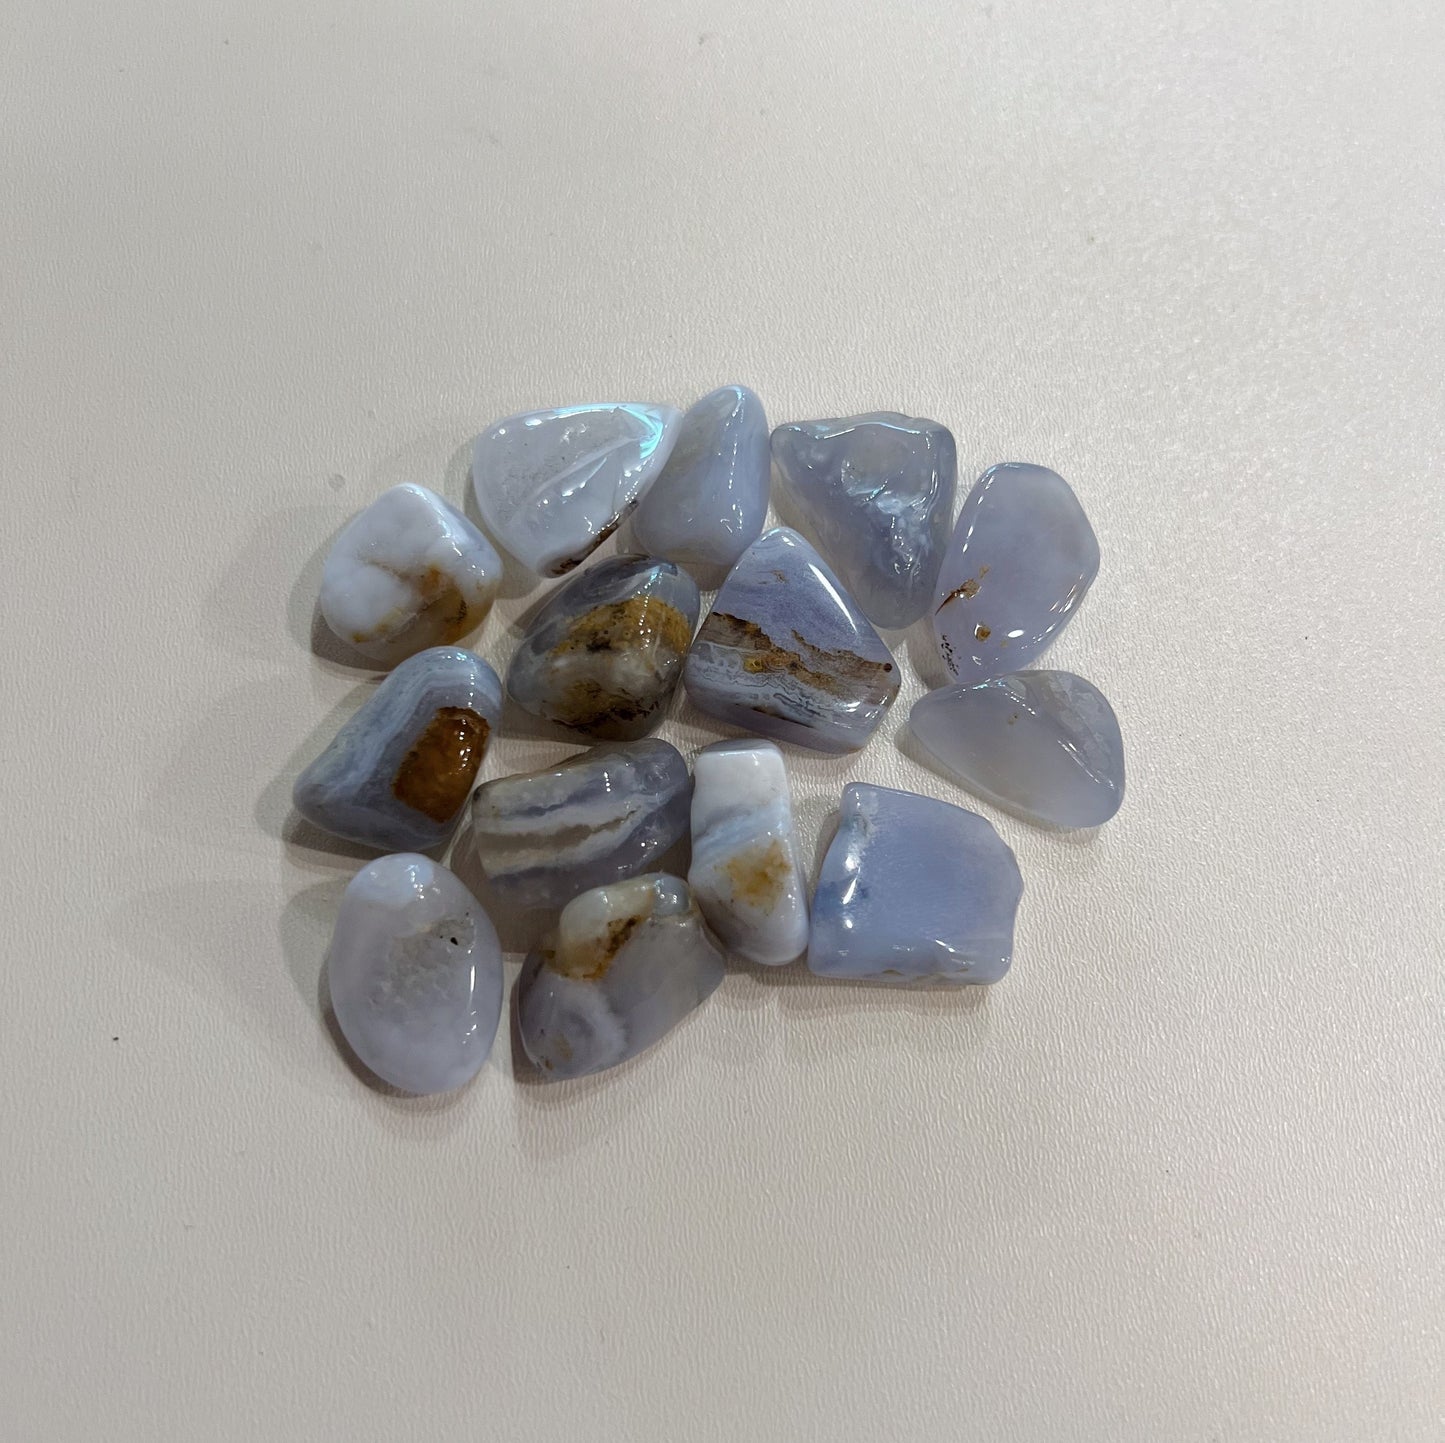 Blue Lace Agate/Blue Chalcedony Tumble